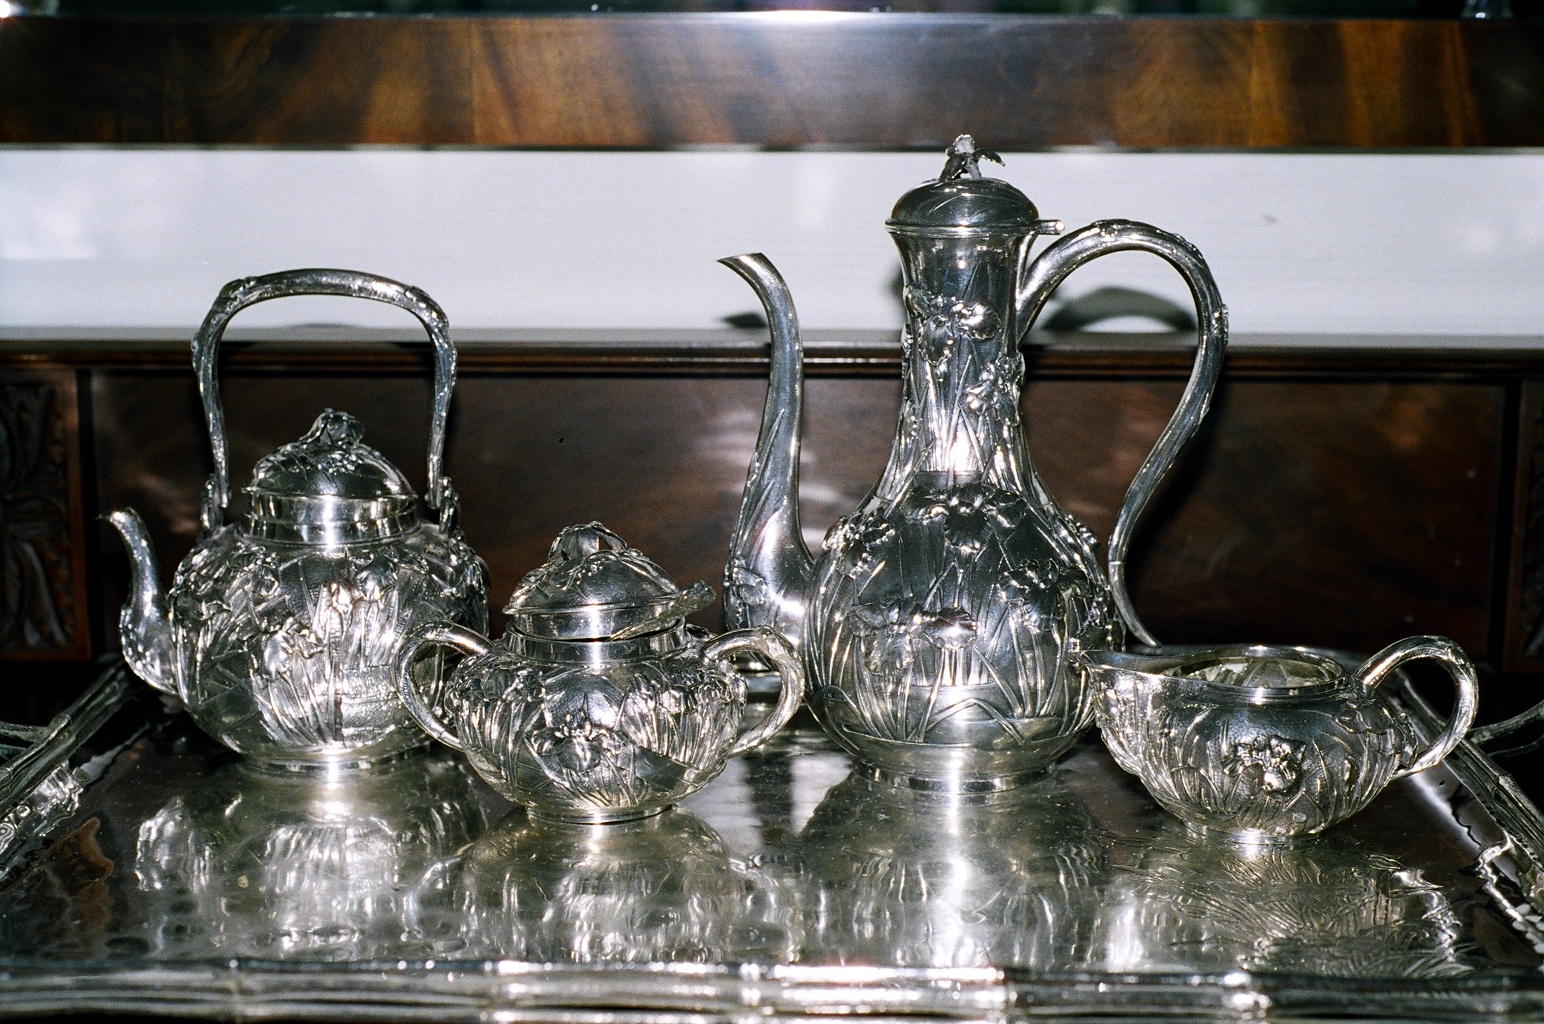 Silver tea service, jewelry stolen from Virginia home